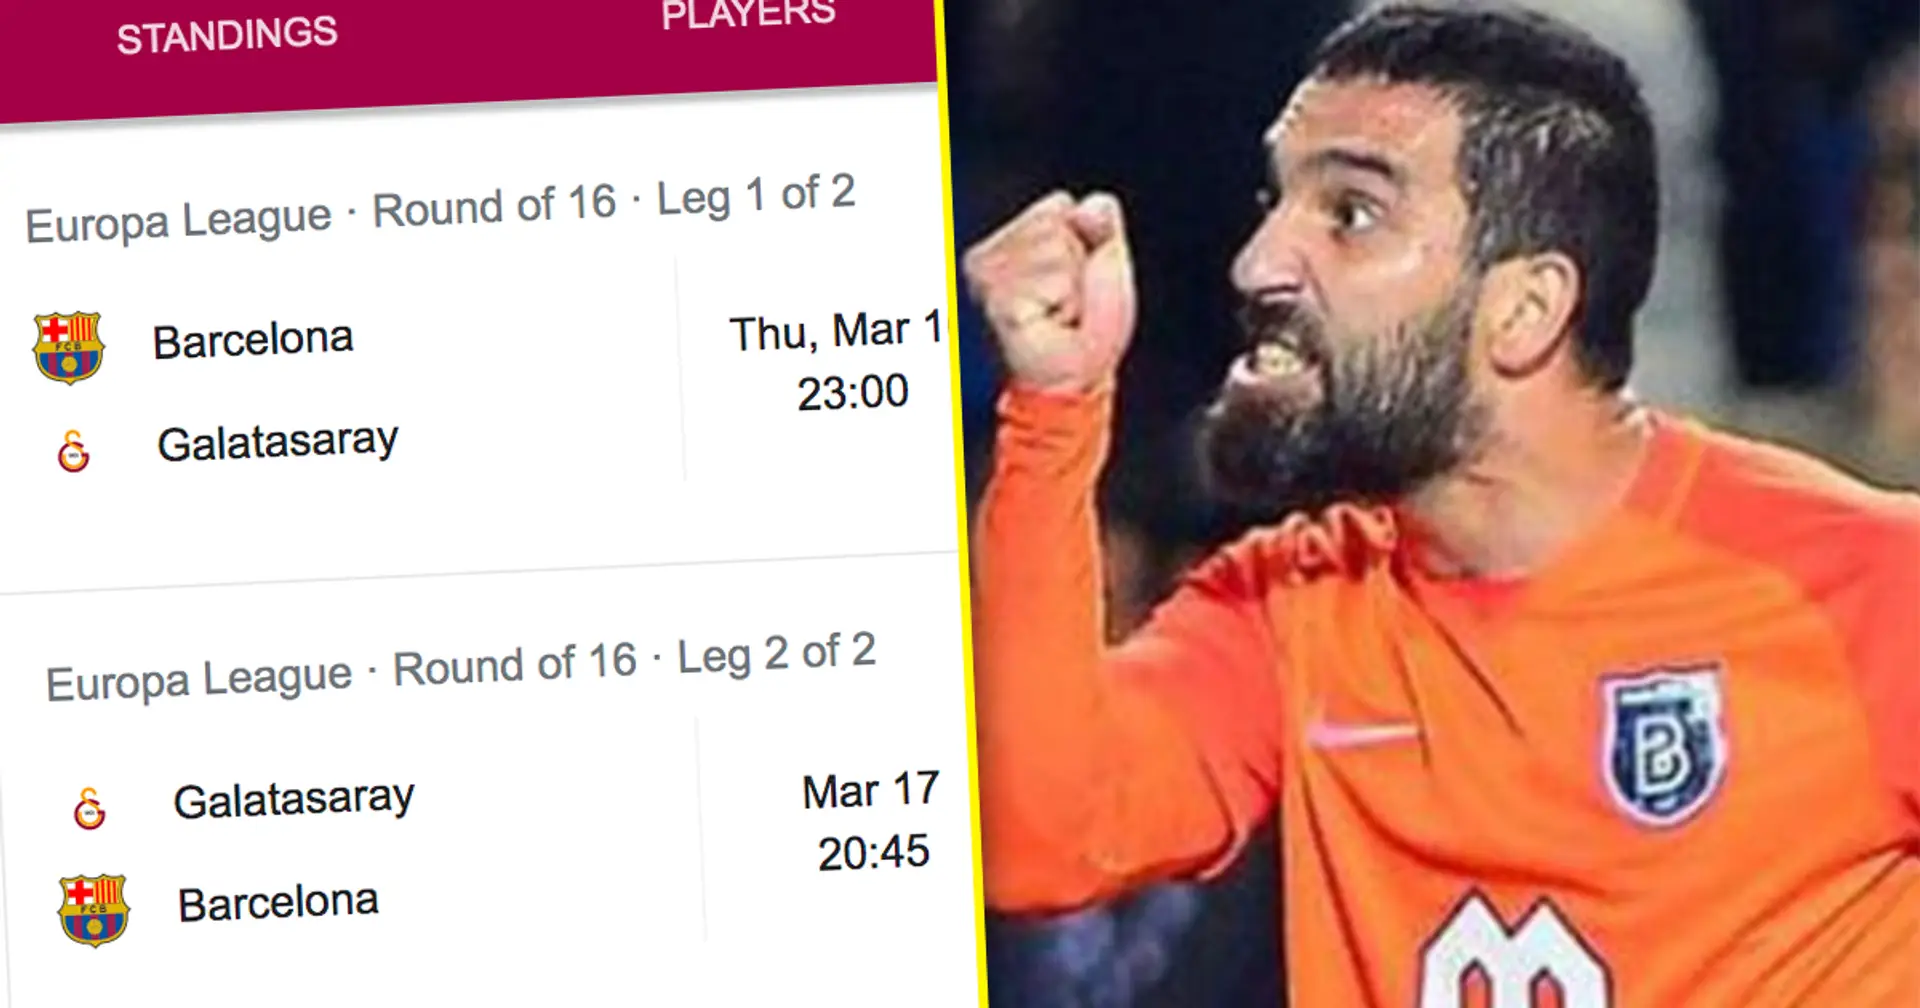 Galatasaray reportedly suspend Arda Turan from training ahead of Barca reunion: explained